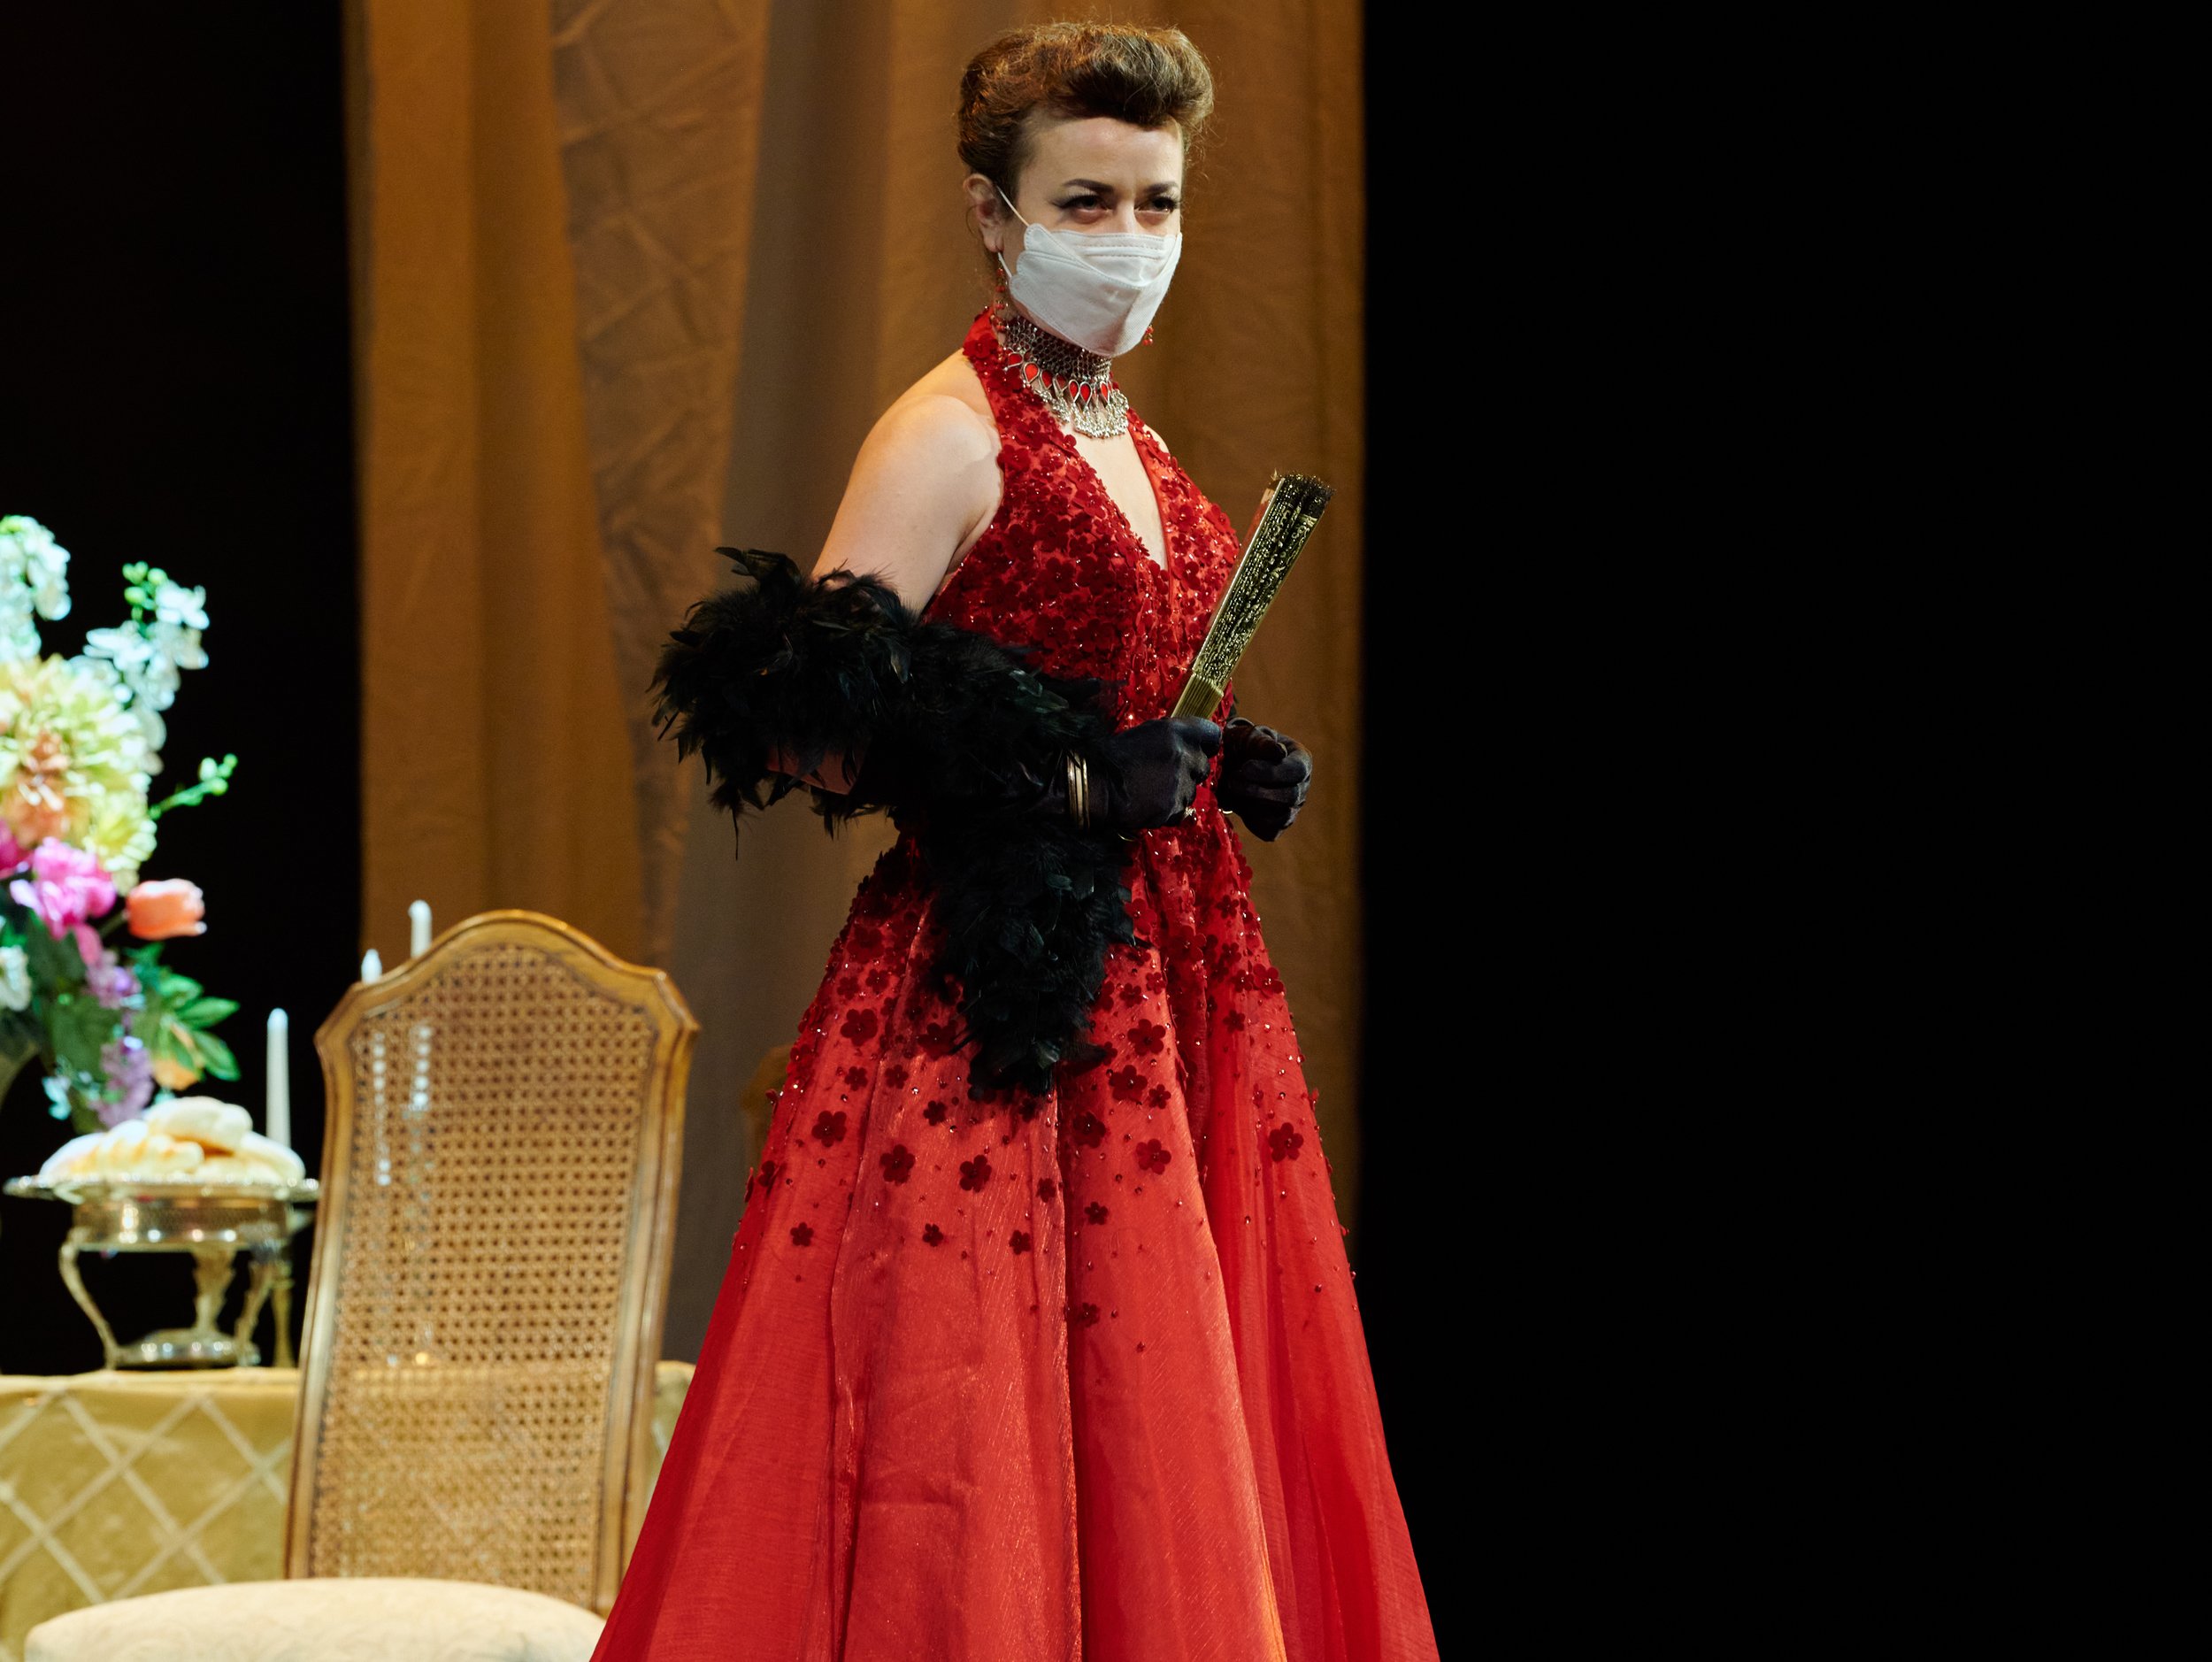  Ana Colesnicov during dress rehearsal of the Santa Monica College Opera Theatre production of "Die Fledermaus" at The Broad Stage on Wednesday, May 18, 2022, in Santa Monica, Calif. (Nicholas McCall | The Corsair) 